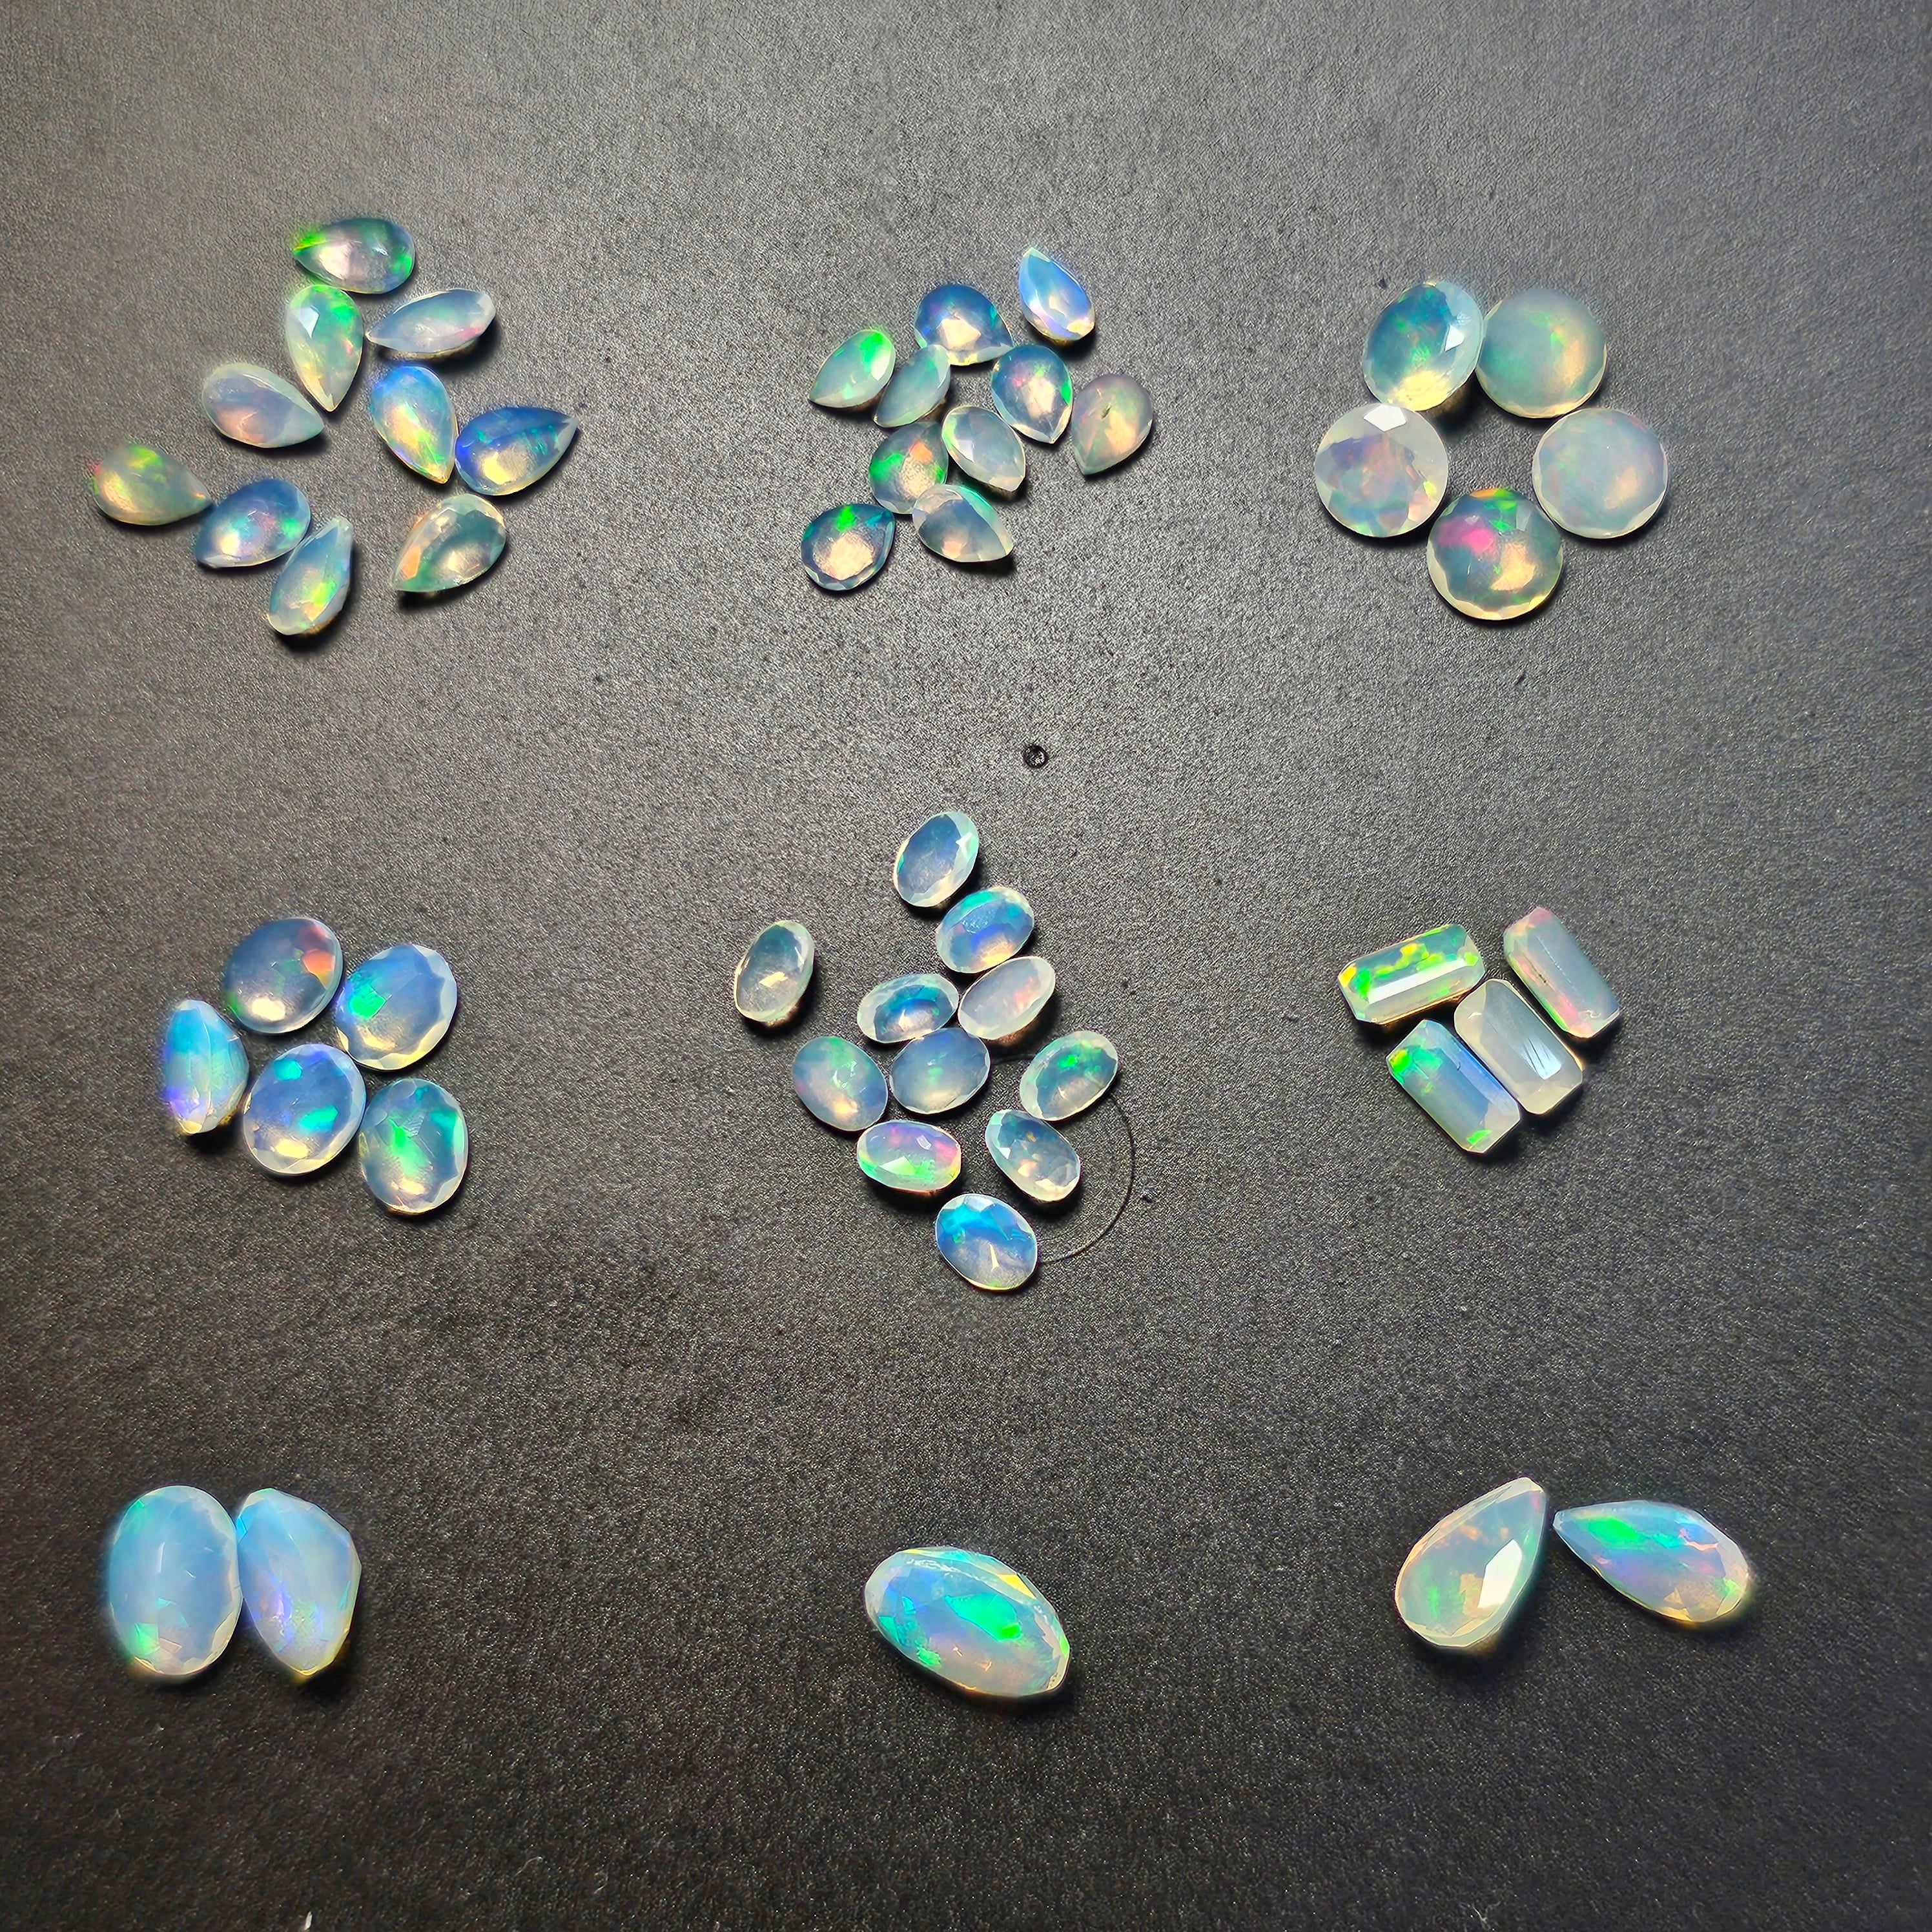 8 Assorted Faceted Natural Welo Opals Set | 4mm to 8mm - The LabradoriteKing